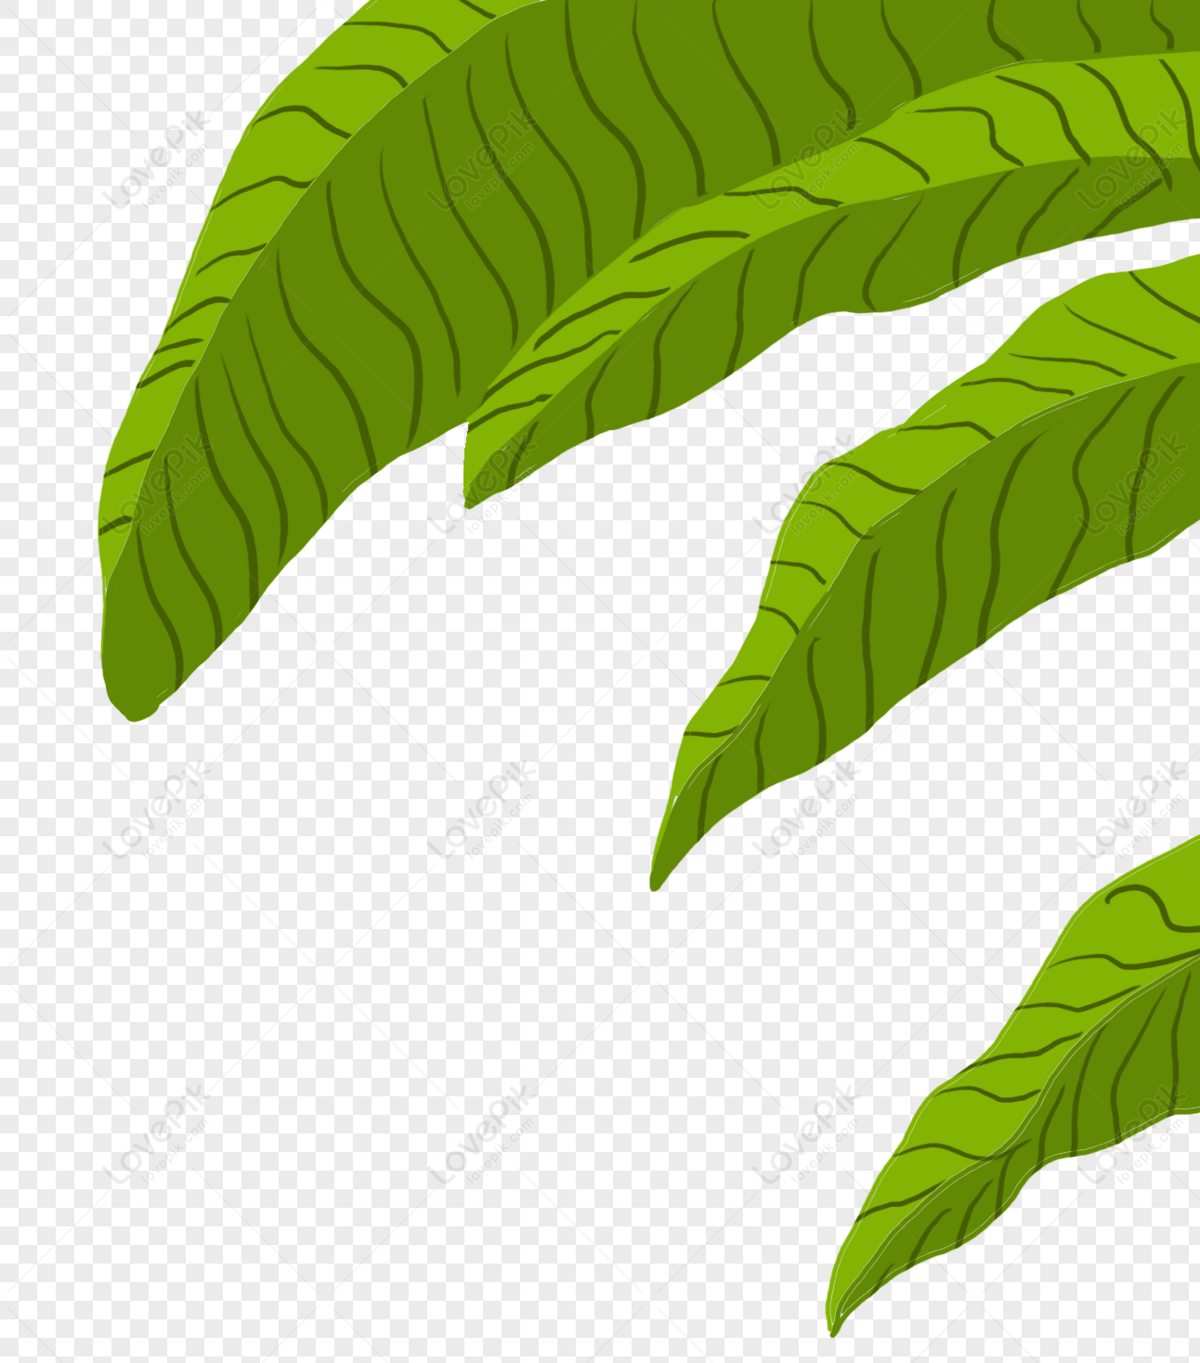 Banana Leaf PNG Hd Transparent Image And Clipart Image For Free Download -  Lovepik | 400414804